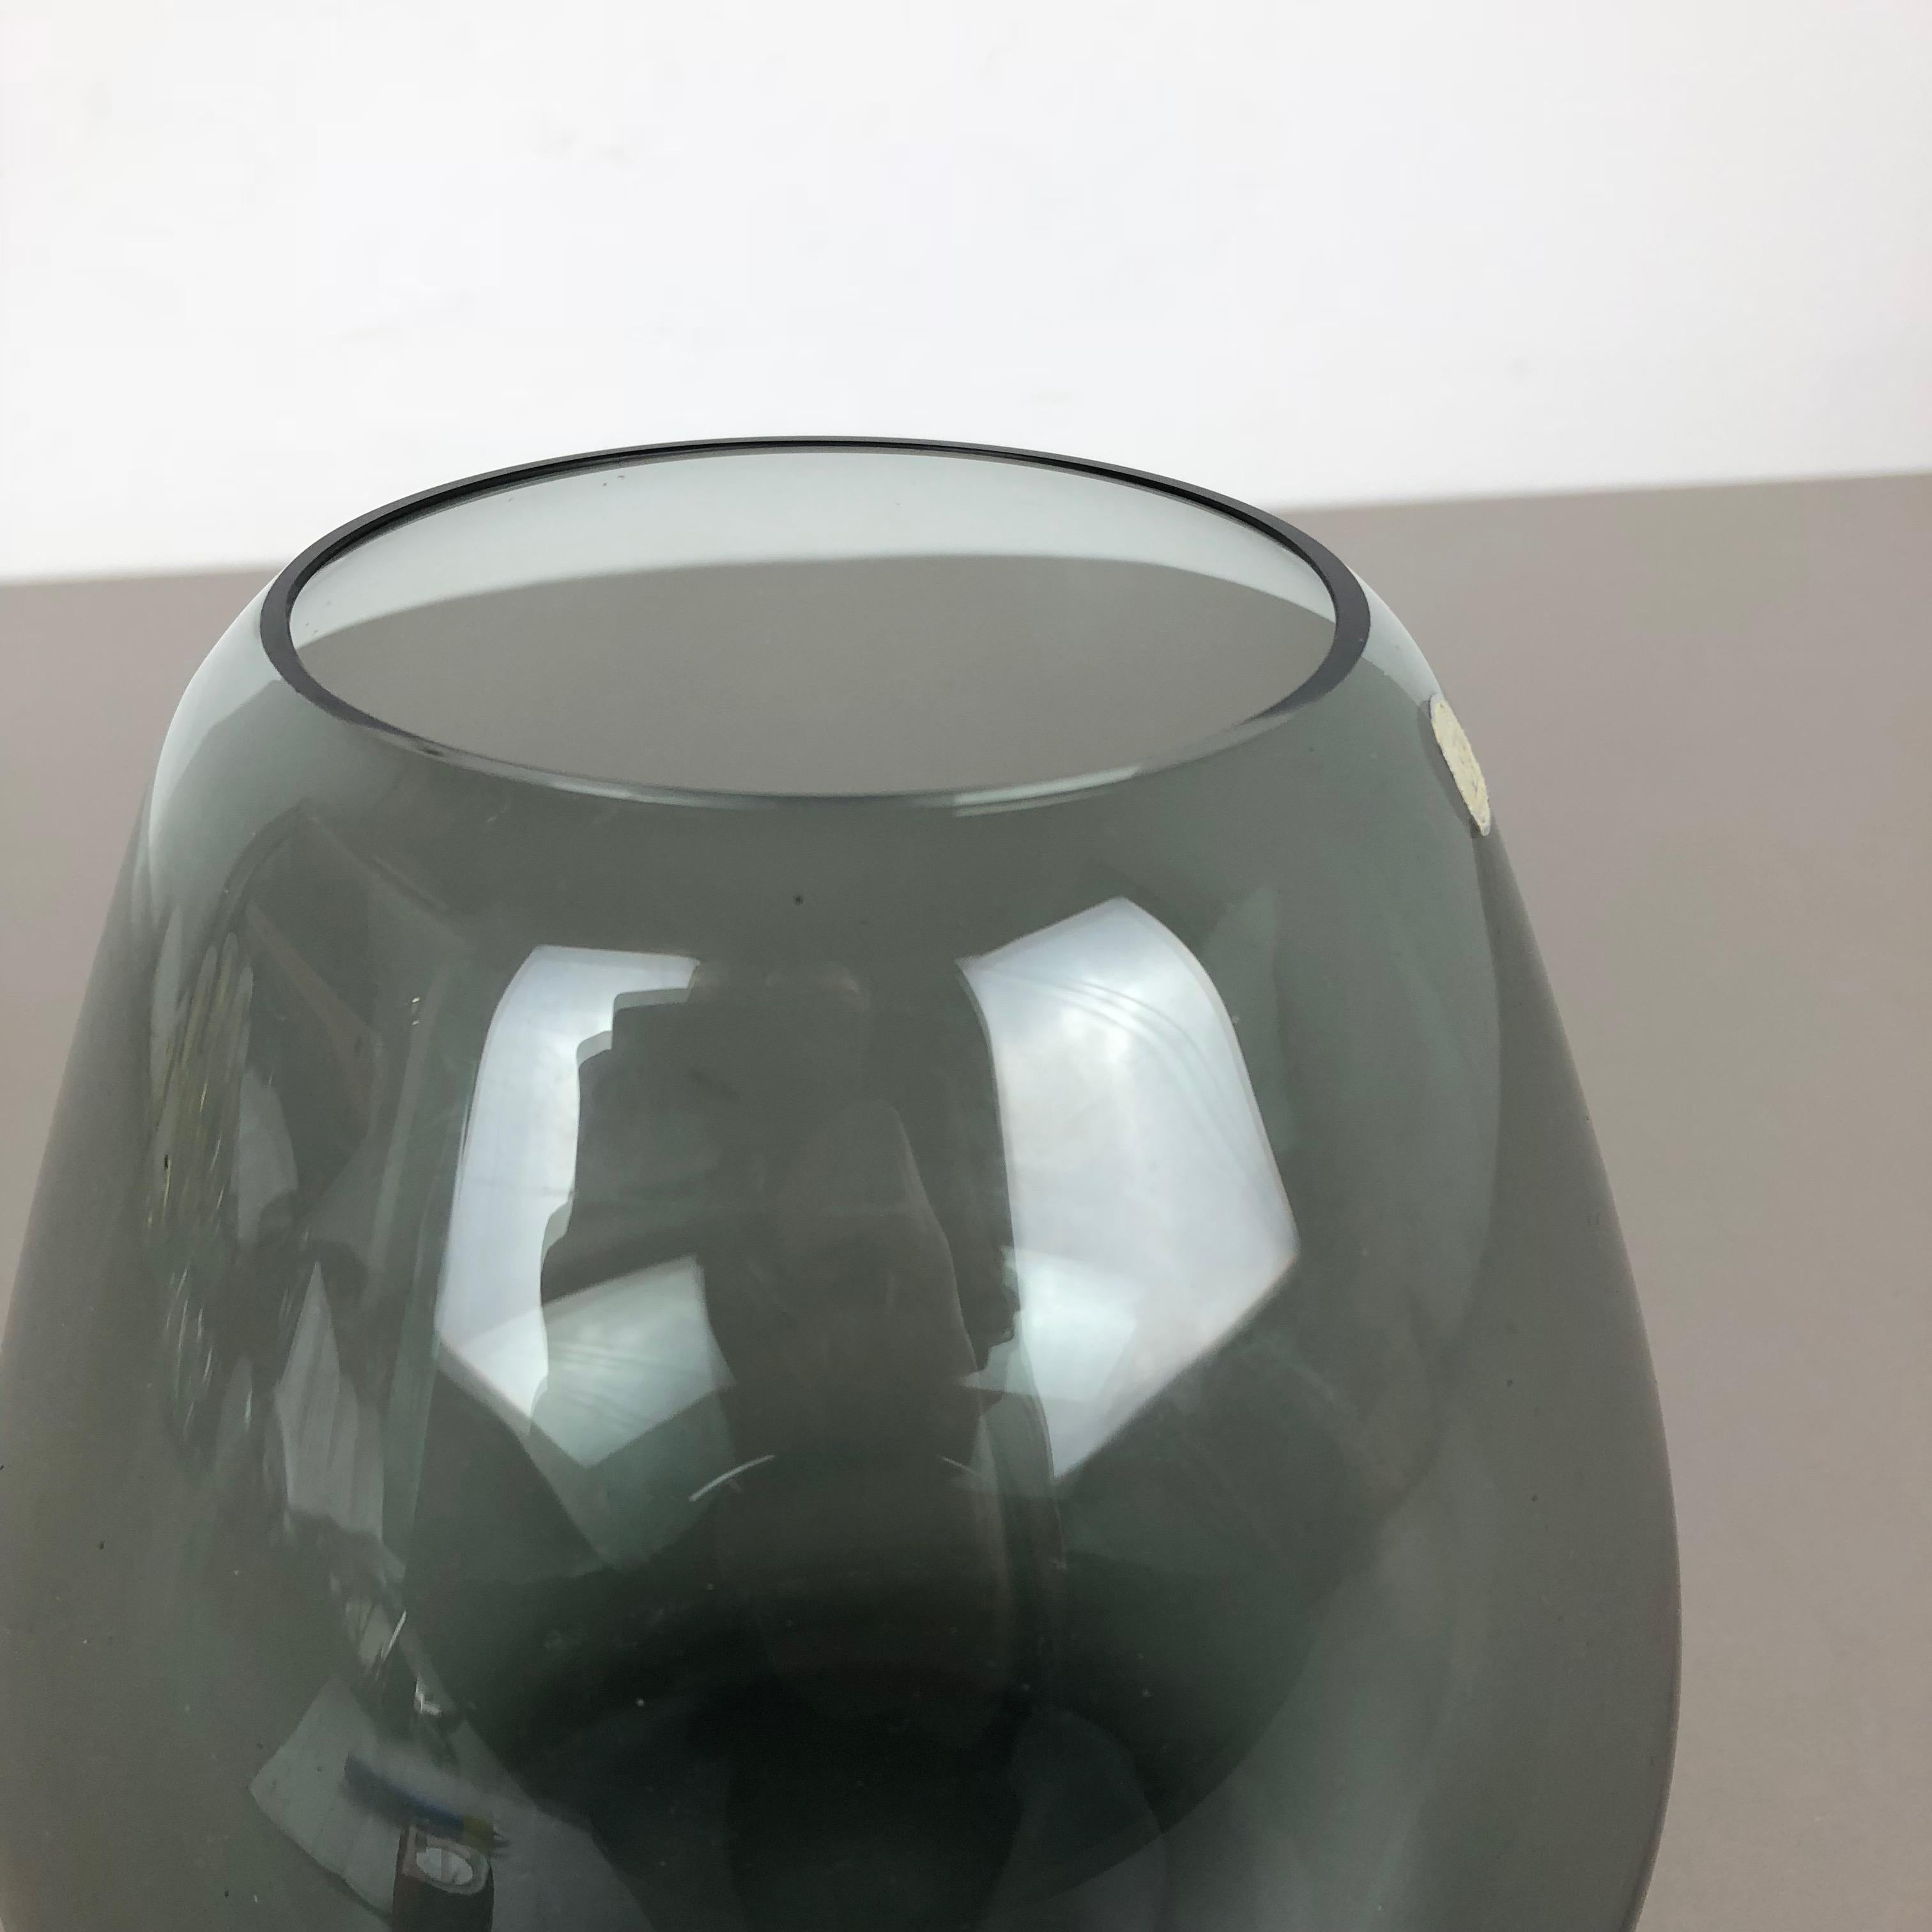 Vintage 1960s Turmalin Vase by Wilhelm Wagenfeld for WMF, Germany Bauhaus For Sale 4